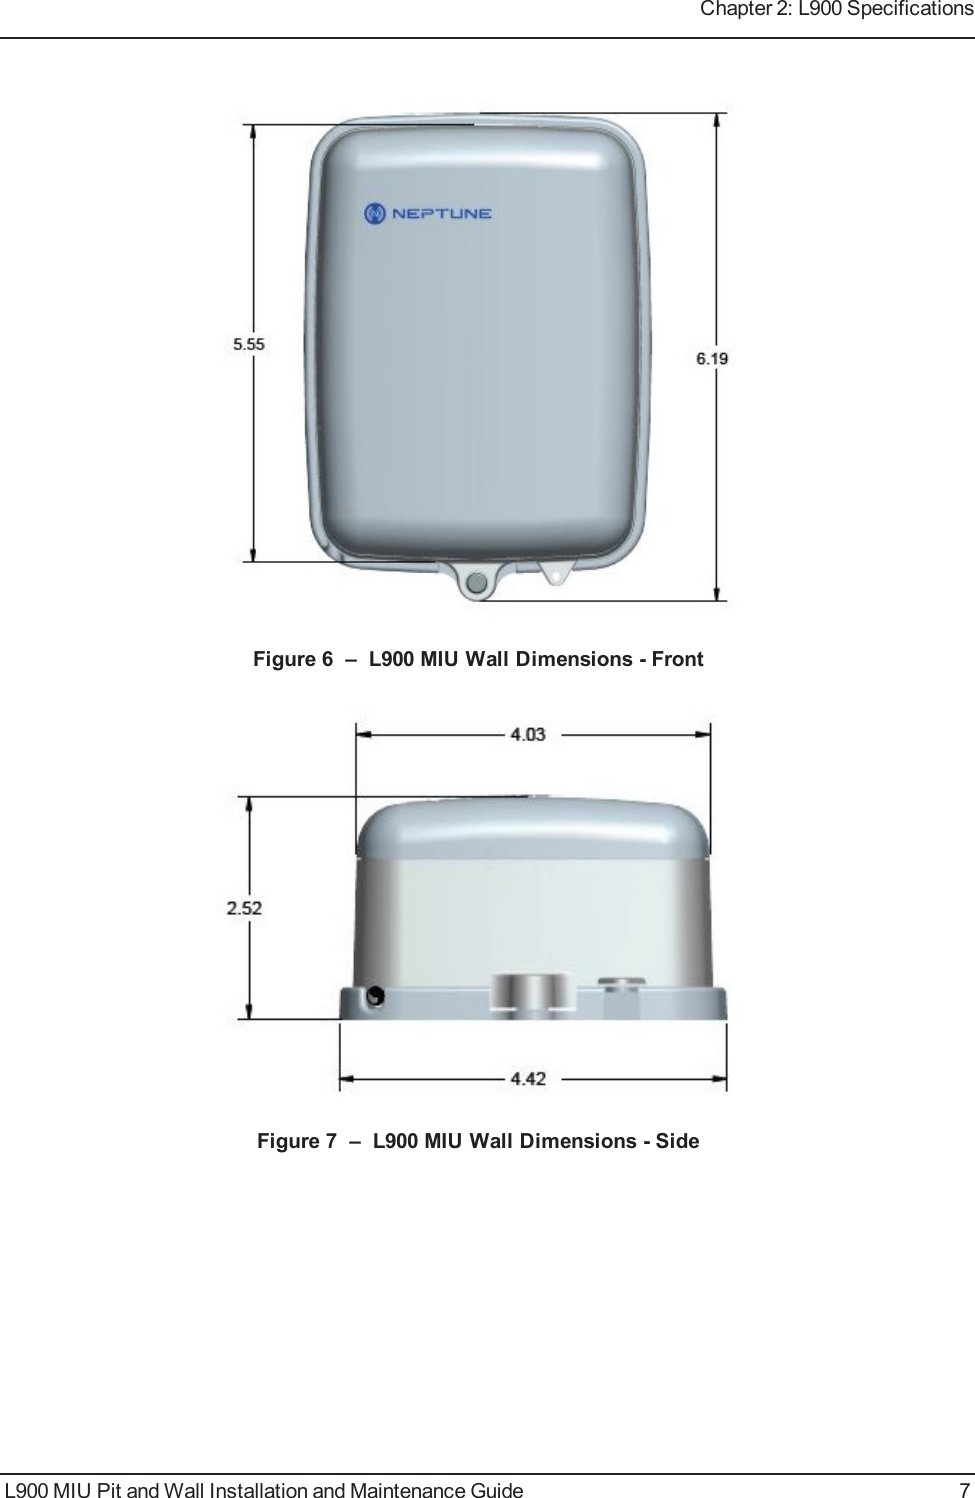 Figure 6 – L900 MIU Wall Dimensions - FrontFigure 7 – L900 MIU Wall Dimensions - SideL900 MIU Pit and Wall Installation and Maintenance Guide 7Chapter 2: L900 Specifications